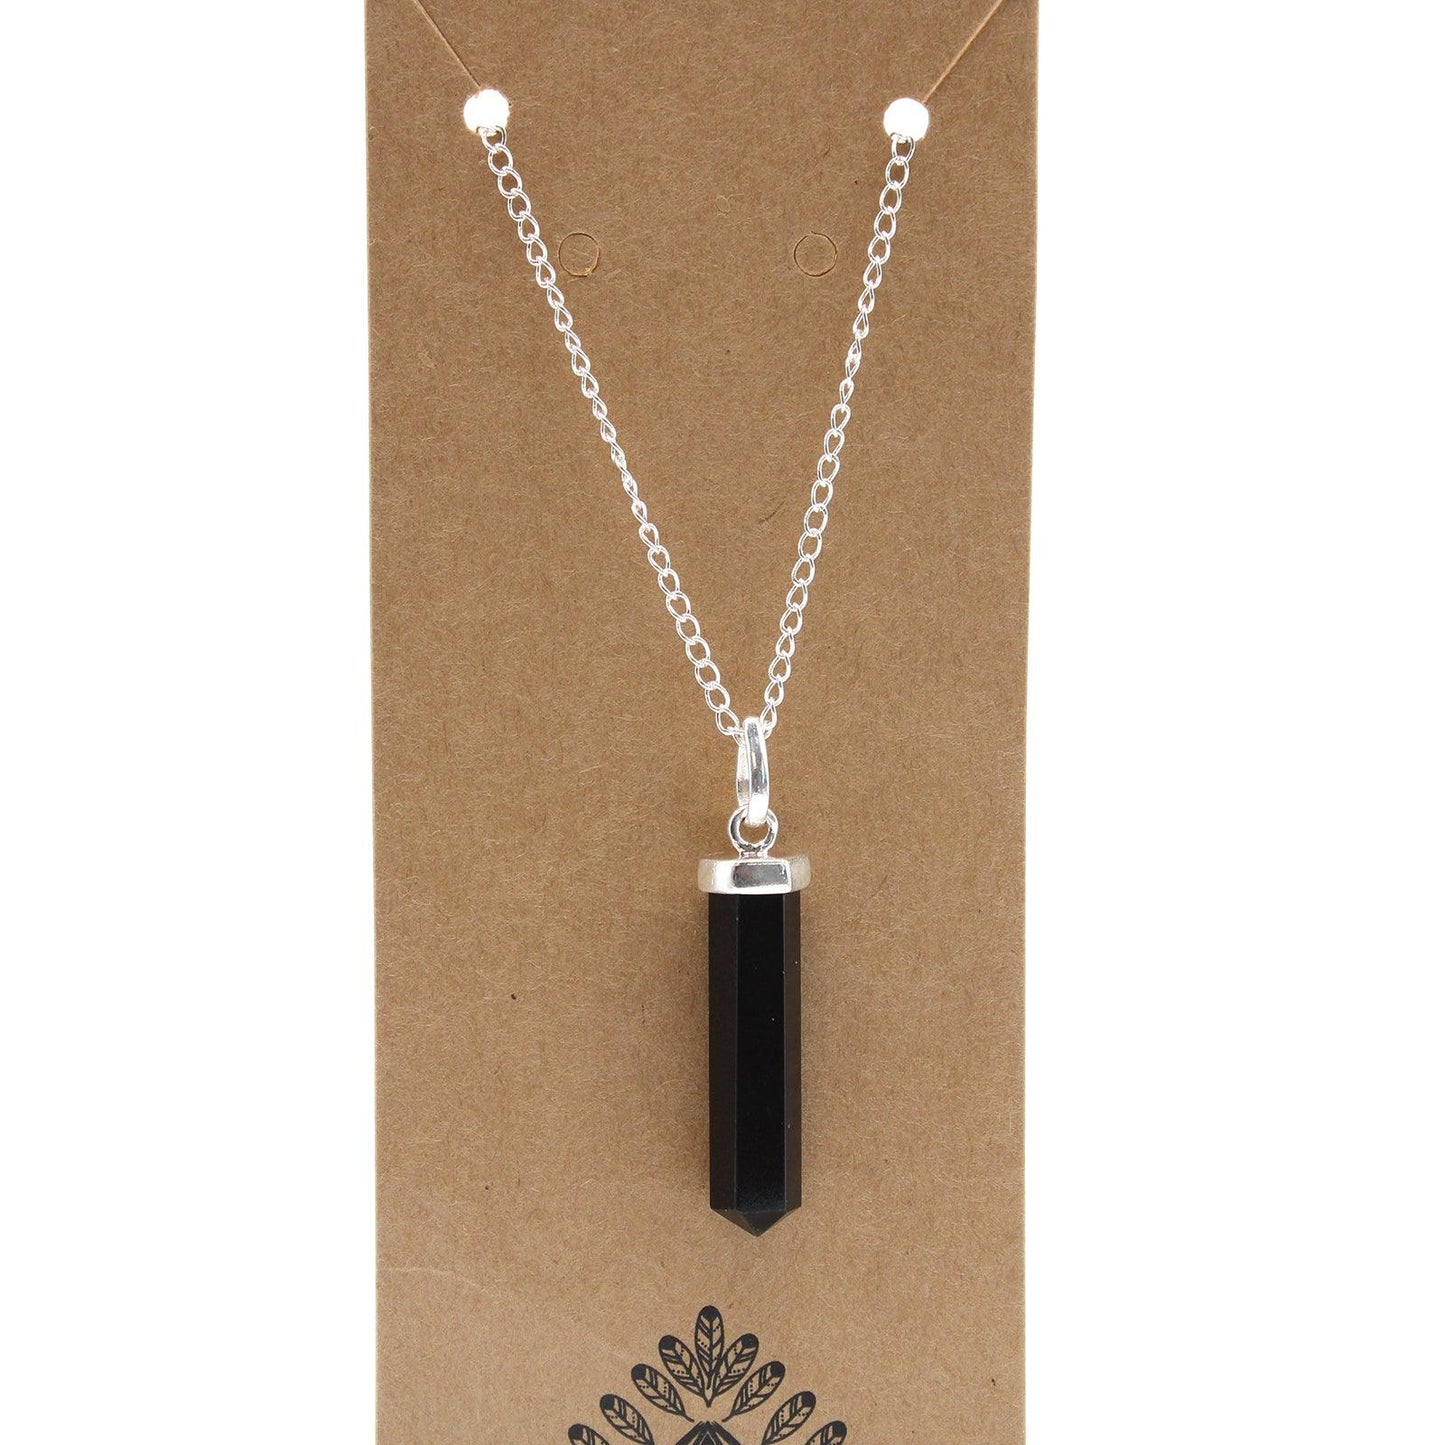 Gemstone Classic Point Pendant Necklace - Black Agate - Free Pouch